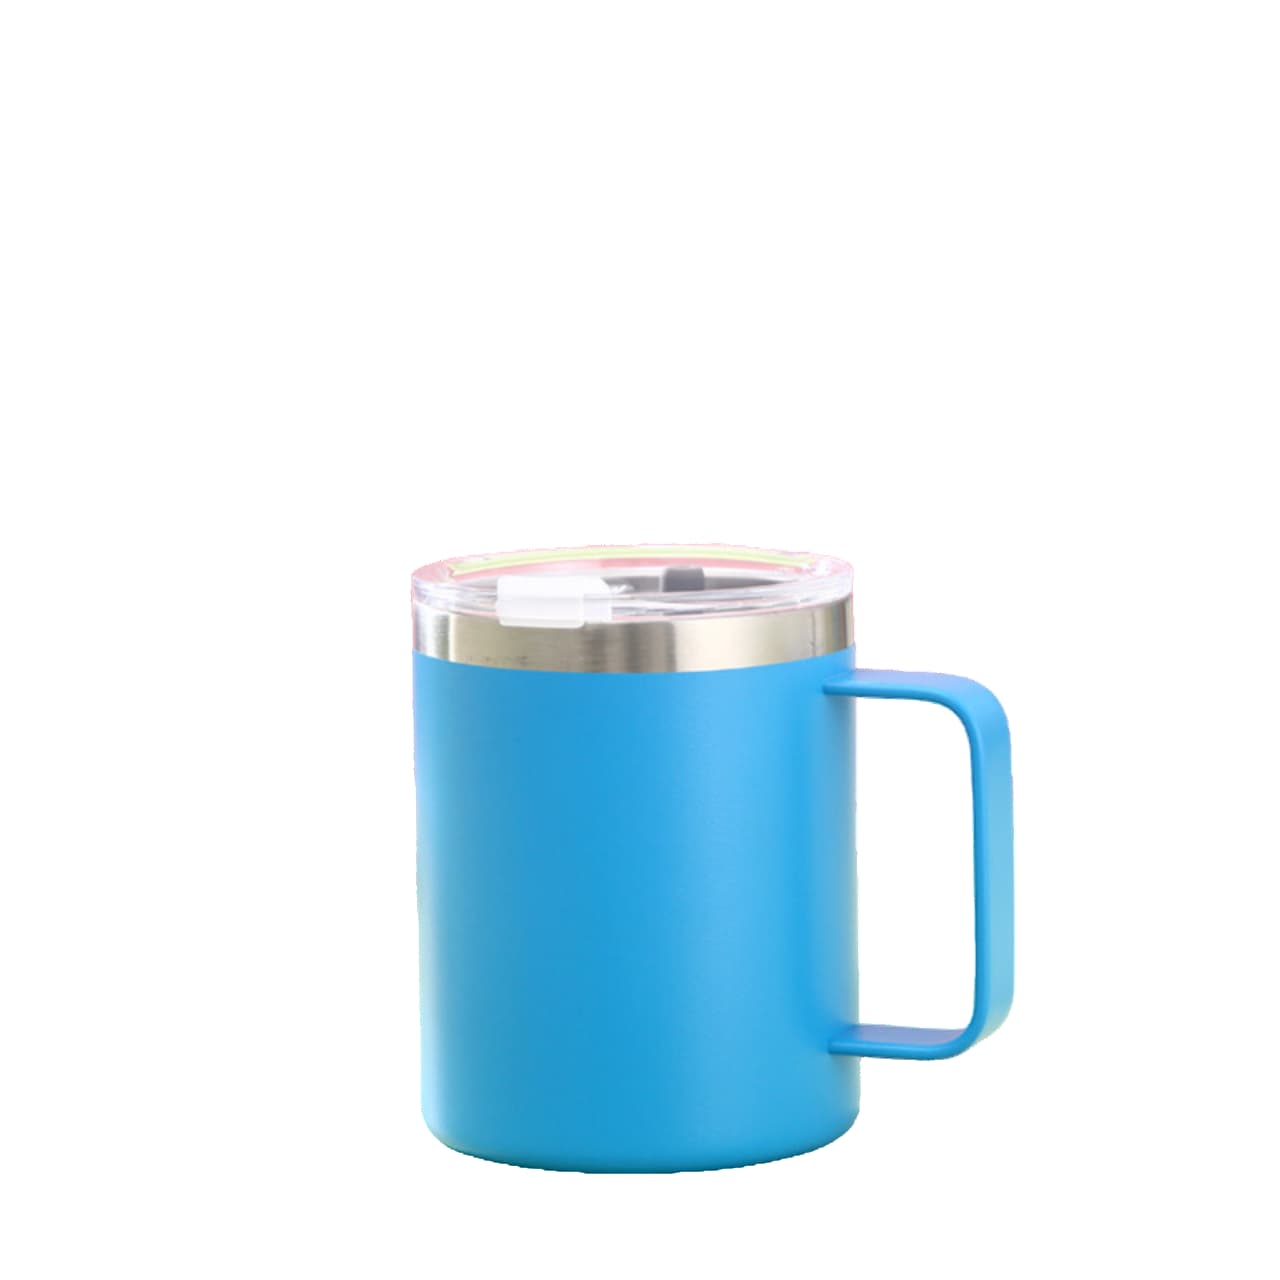 304 stainless steel CUP with handle-light blue